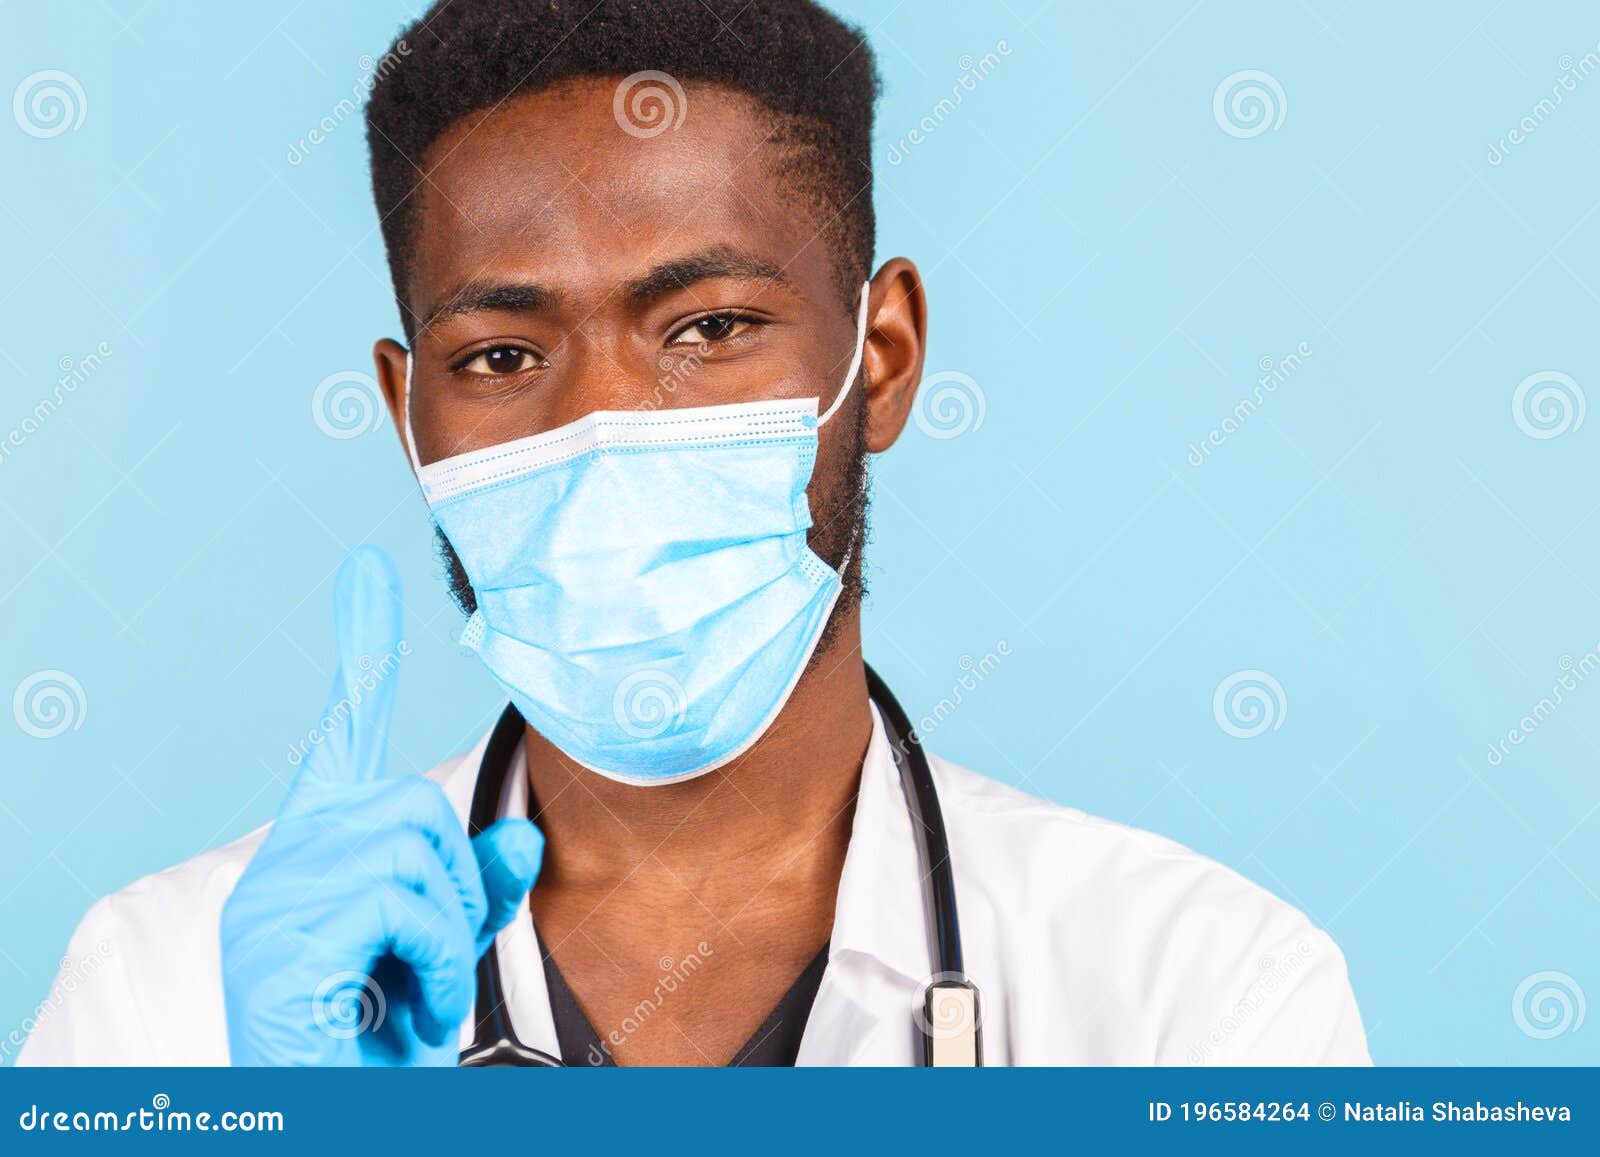 African American Male Doctor with Stethoscope Wearing Mask and Gloves ...